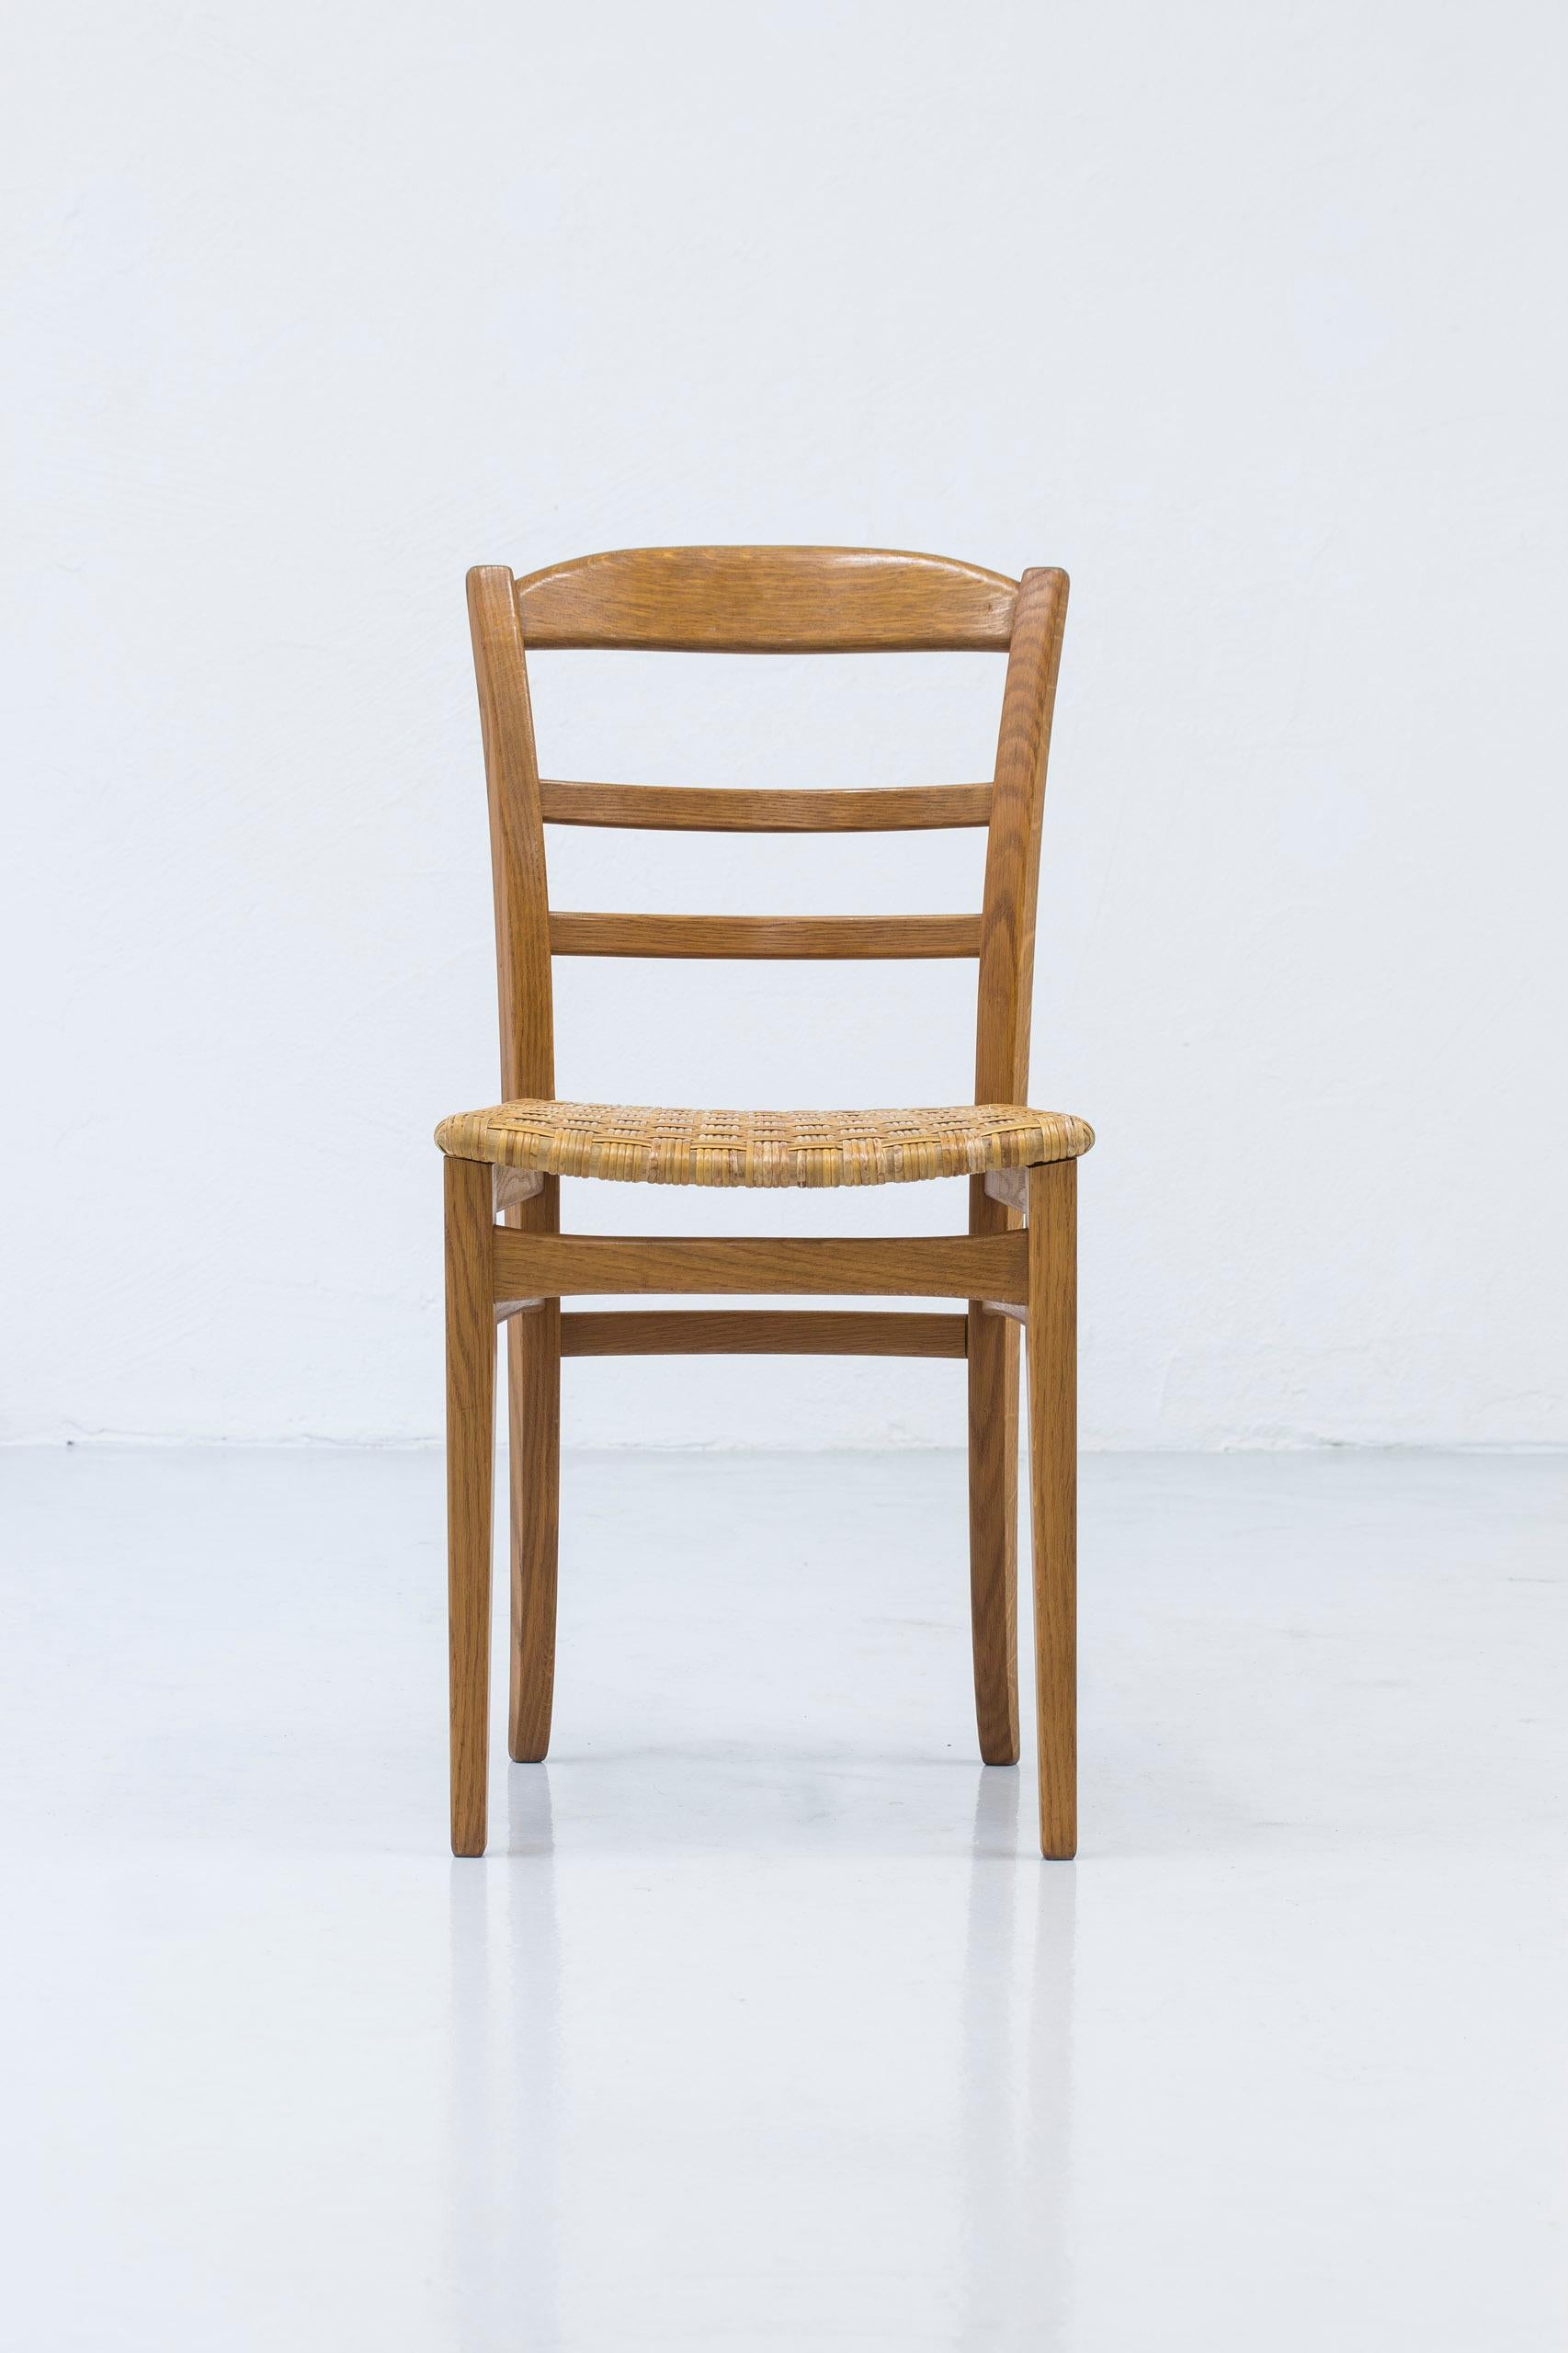 Oak and Cane Weave Dining Chairs by Carl Malmsten, Swedish Modern, 1950s For Sale 6